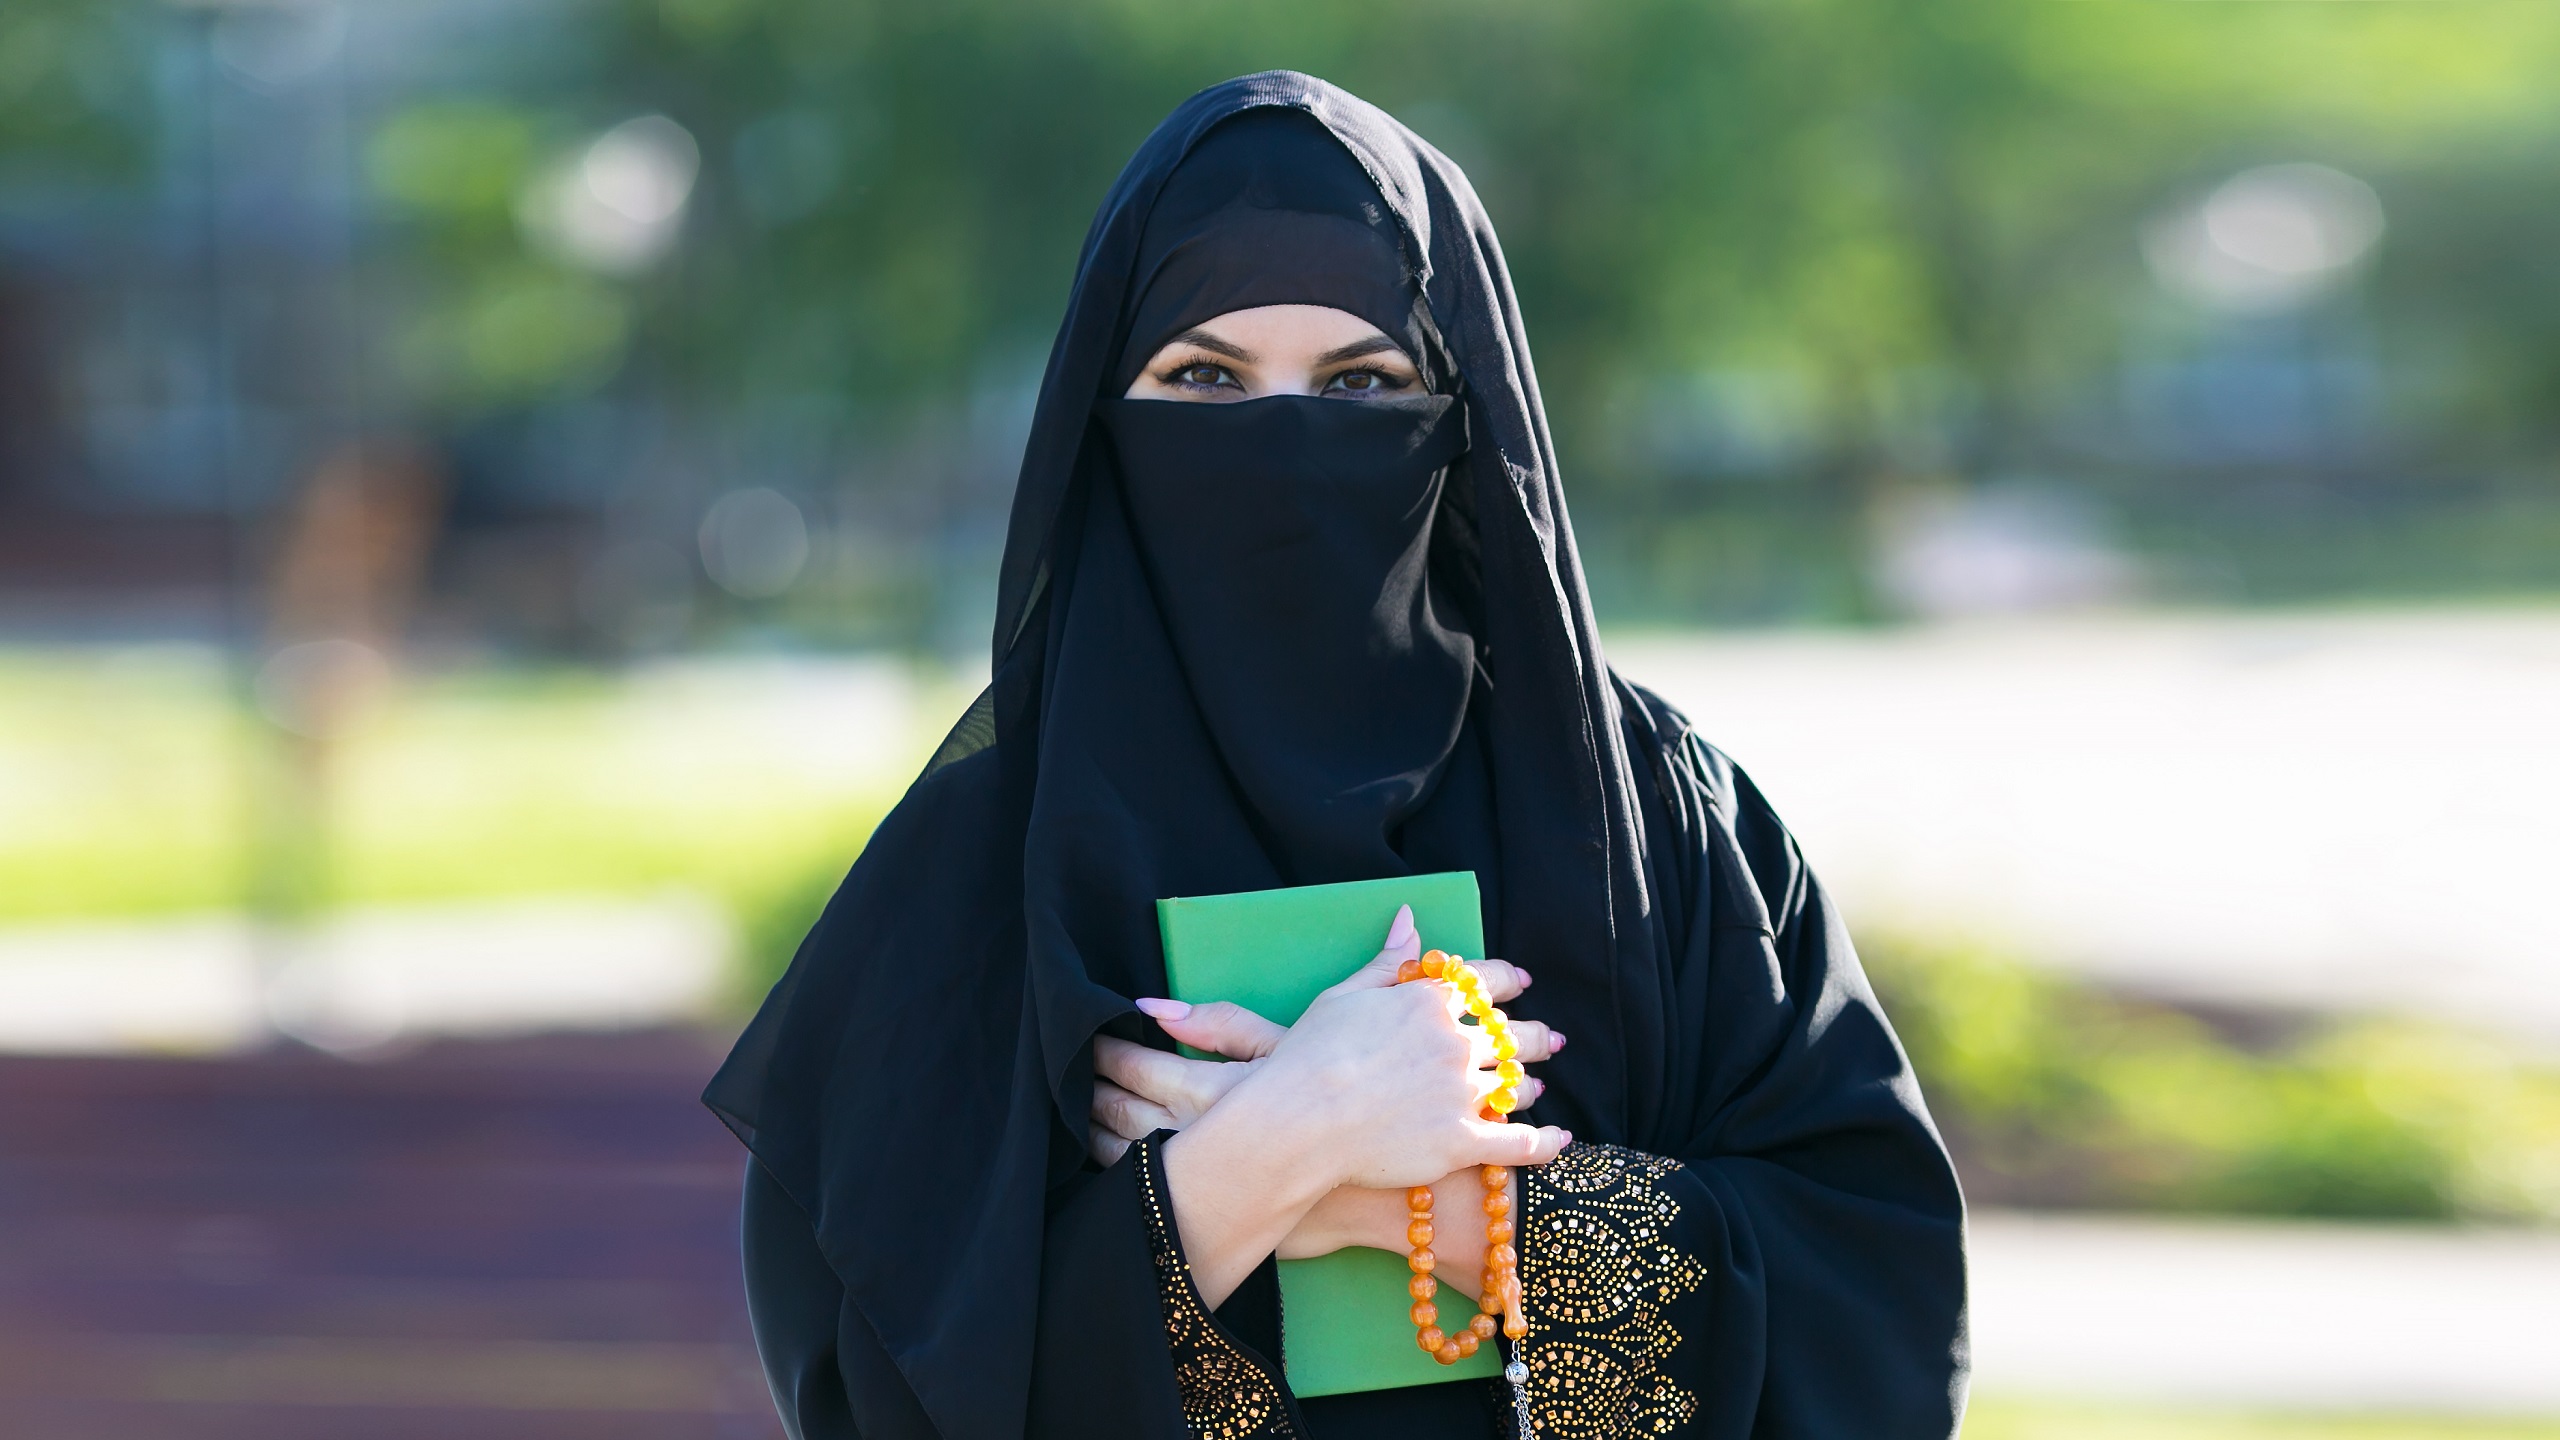 The Education Ministry Bans the Niqab